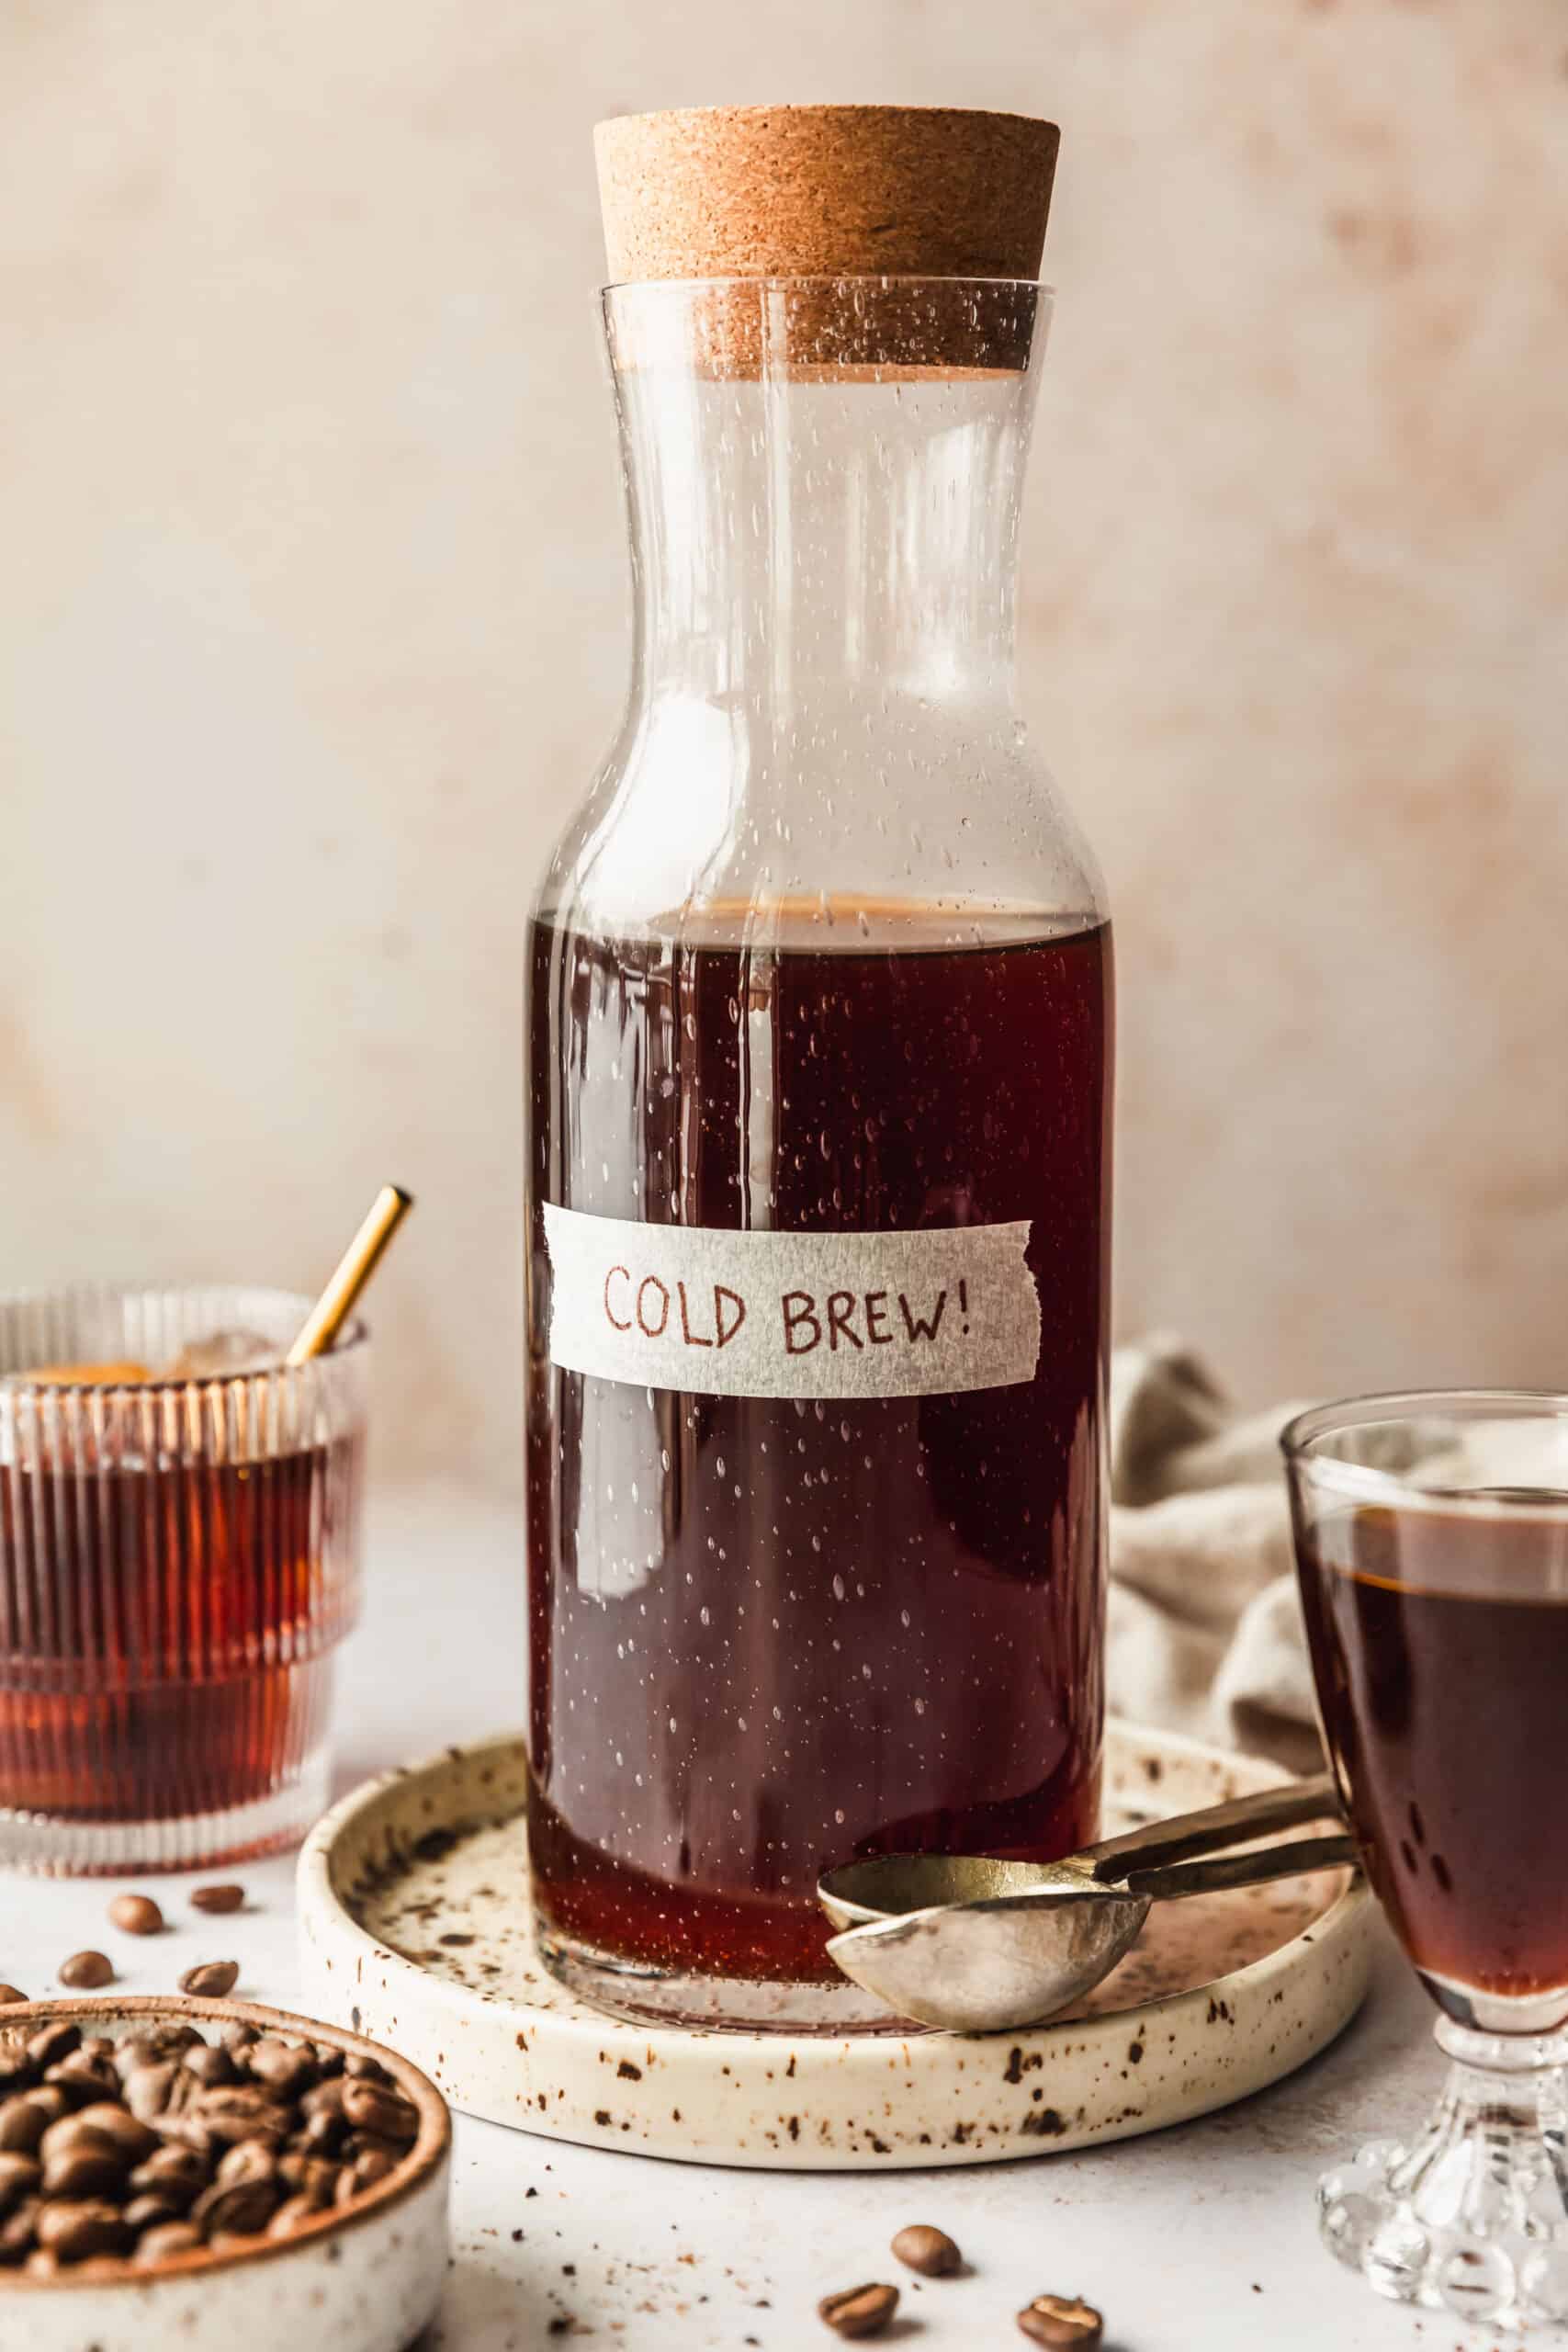 A carafe with cold brew on a beige background next to a white bowl of coffee beans, glass of cold brew, and glass of cold brew coffee concentrate.